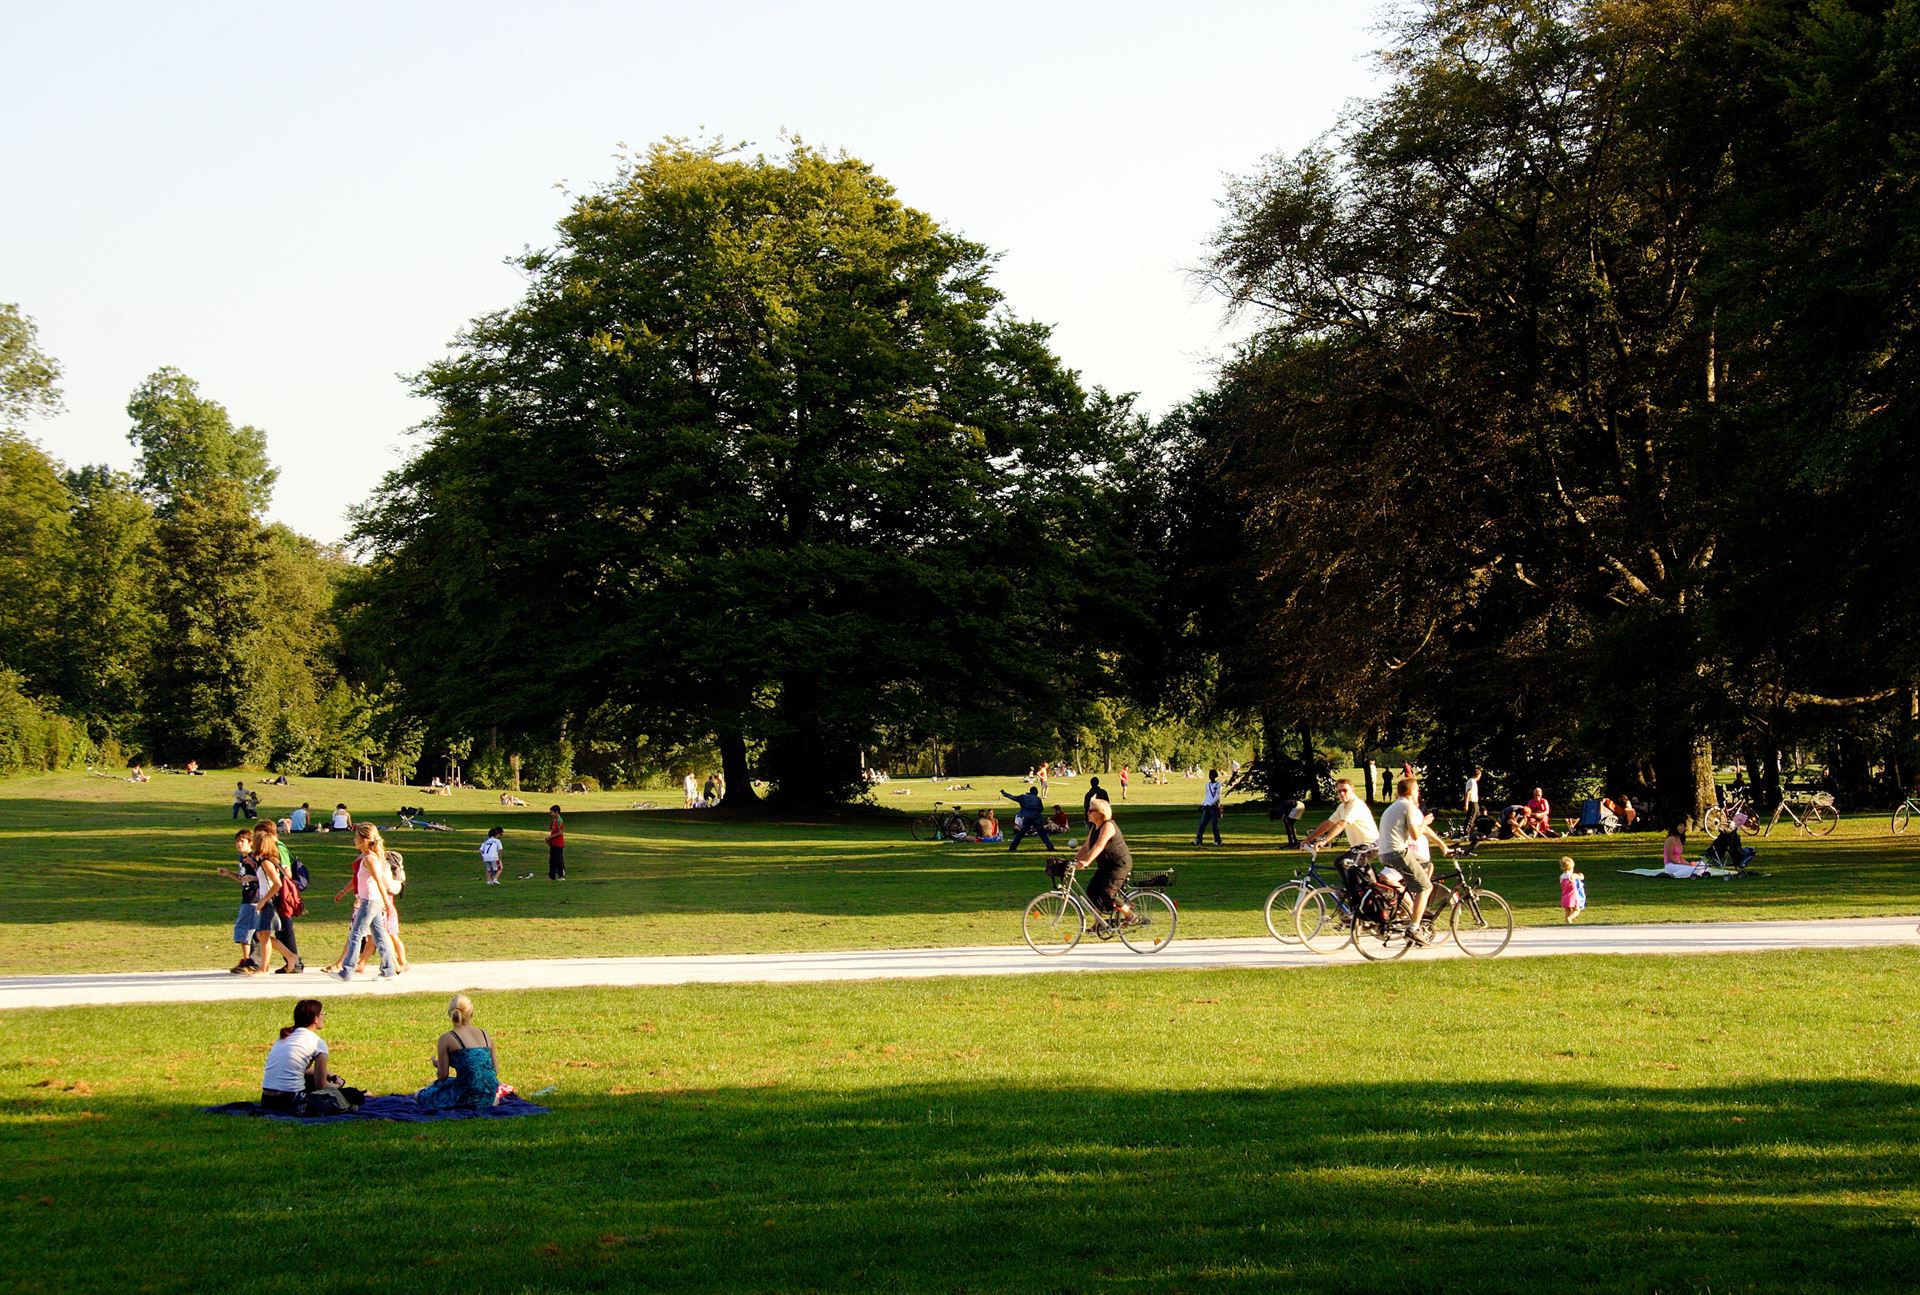 People in a park, some are walking down a path, some are sitting in the shade